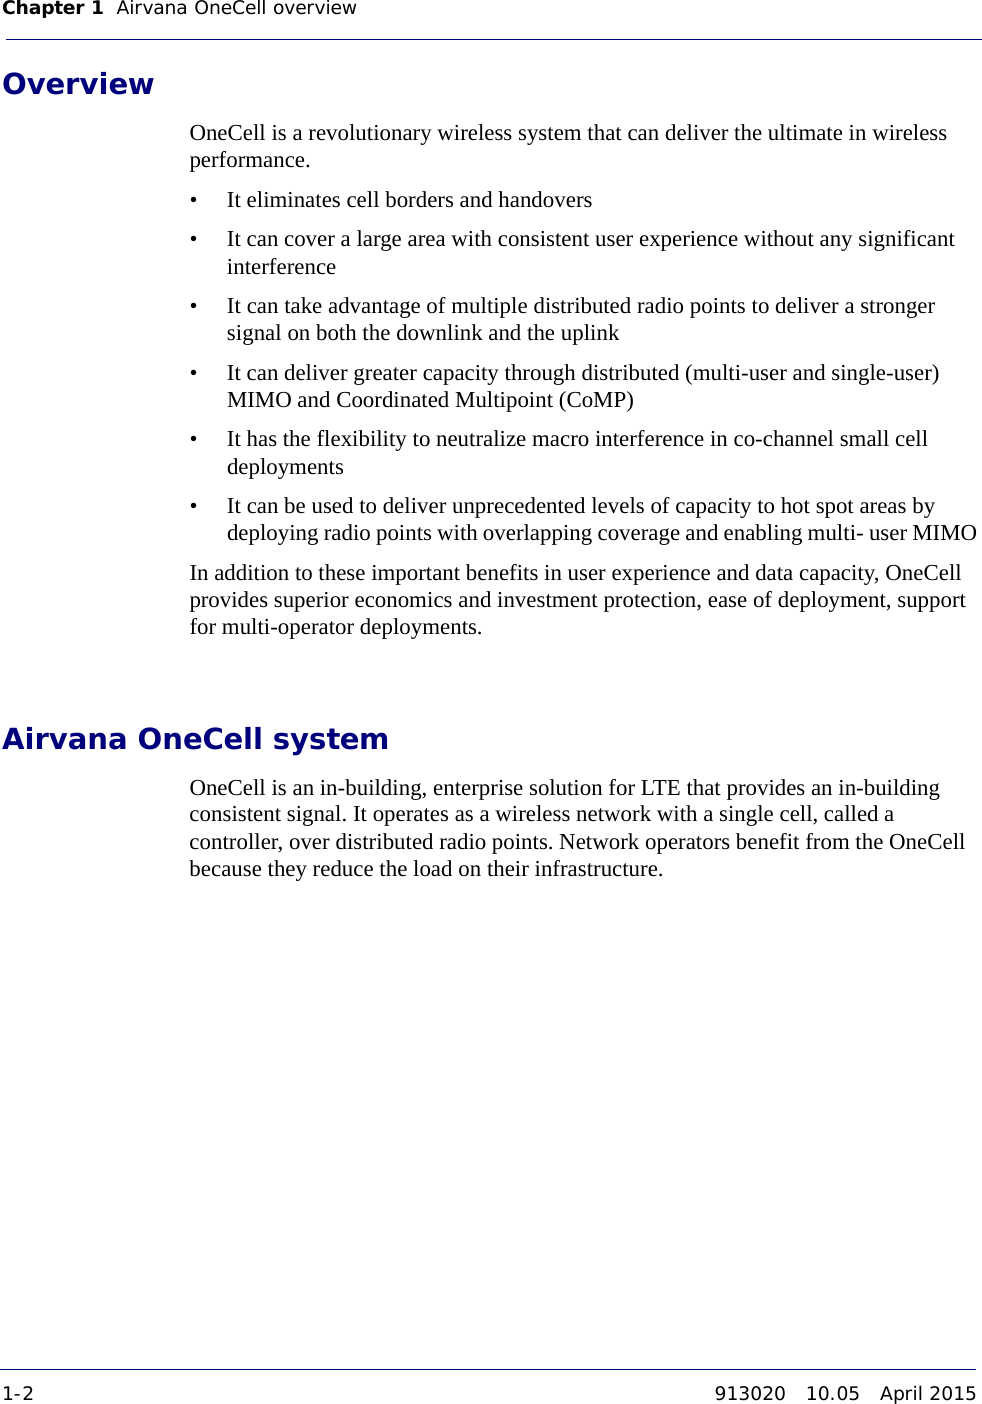 Chapter 1 Airvana OneCell overview 1-2 913020 10.05 April 2015DRAFTOverviewOneCell is a revolutionary wireless system that can deliver the ultimate in wireless performance.• It eliminates cell borders and handovers• It can cover a large area with consistent user experience without any significant interference • It can take advantage of multiple distributed radio points to deliver a stronger signal on both the downlink and the uplink• It can deliver greater capacity through distributed (multi-user and single-user) MIMO and Coordinated Multipoint (CoMP)• It has the flexibility to neutralize macro interference in co-channel small cell deployments• It can be used to deliver unprecedented levels of capacity to hot spot areas by deploying radio points with overlapping coverage and enabling multi- user MIMOIn addition to these important benefits in user experience and data capacity, OneCell provides superior economics and investment protection, ease of deployment, support for multi-operator deployments. Airvana OneCell systemOneCell is an in-building, enterprise solution for LTE that provides an in-building consistent signal. It operates as a wireless network with a single cell, called a controller, over distributed radio points. Network operators benefit from the OneCell because they reduce the load on their infrastructure. 